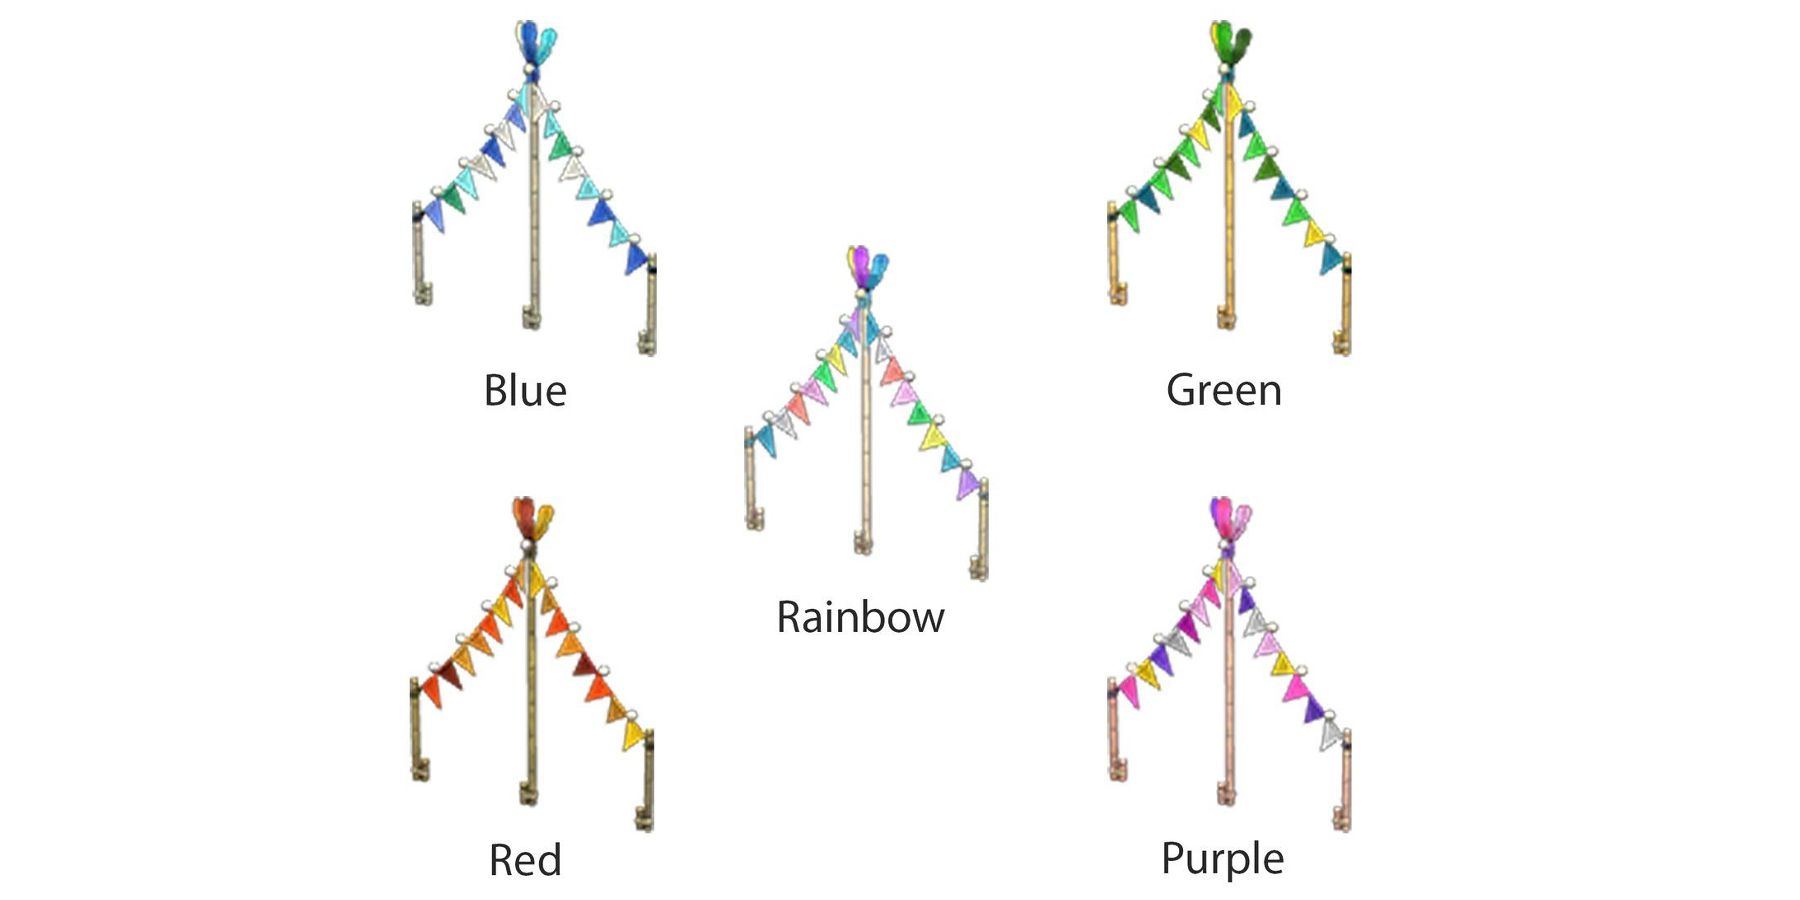 Screenshot of all Festivale Garland variants on a white background